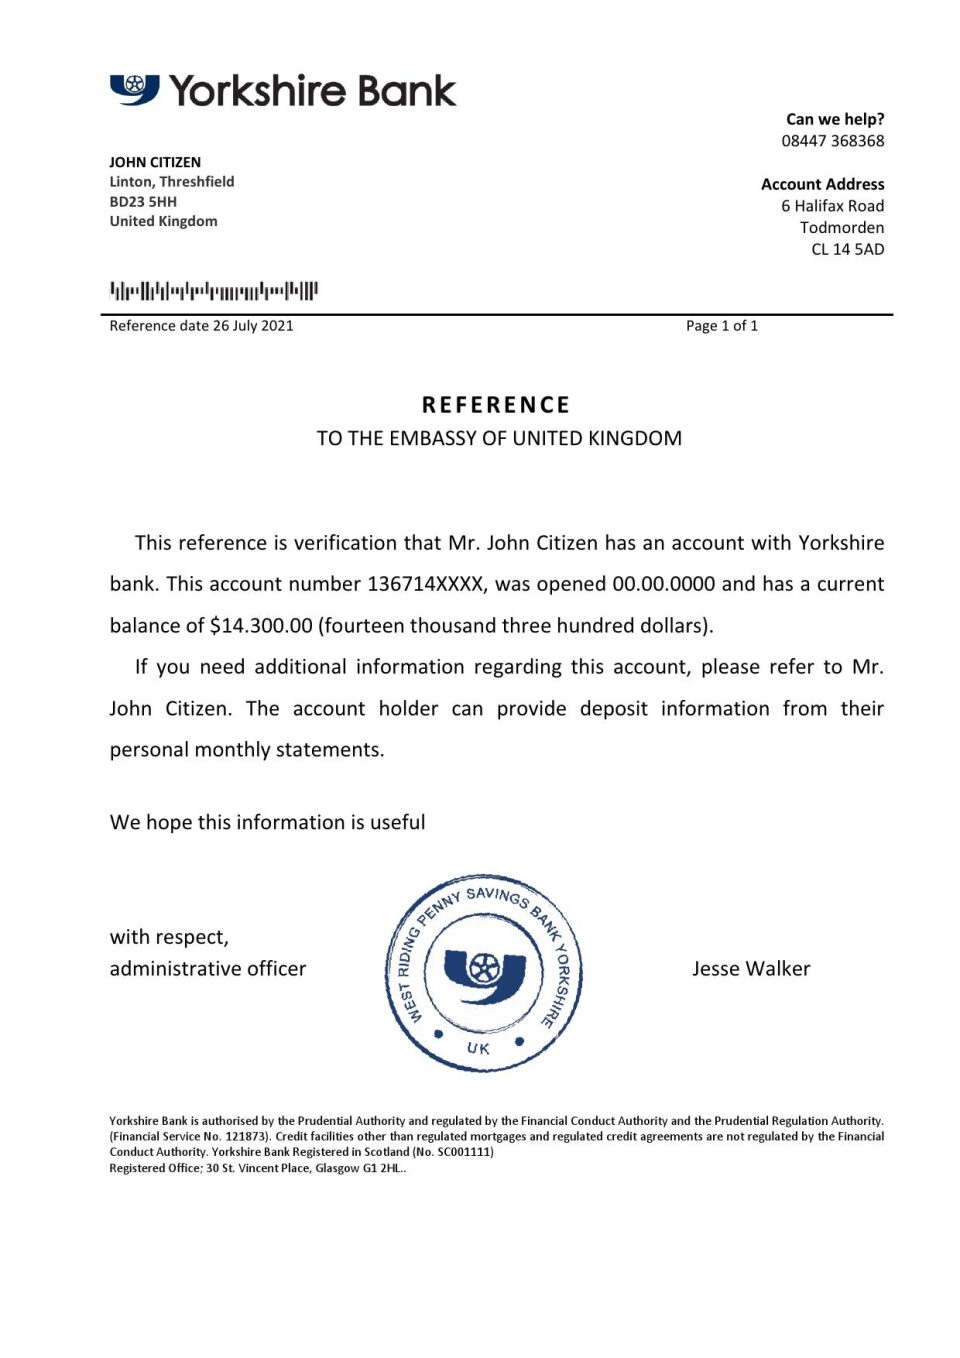 Download United Kingdom Yorkshire Bank Reference Letter Templates | Editable Word